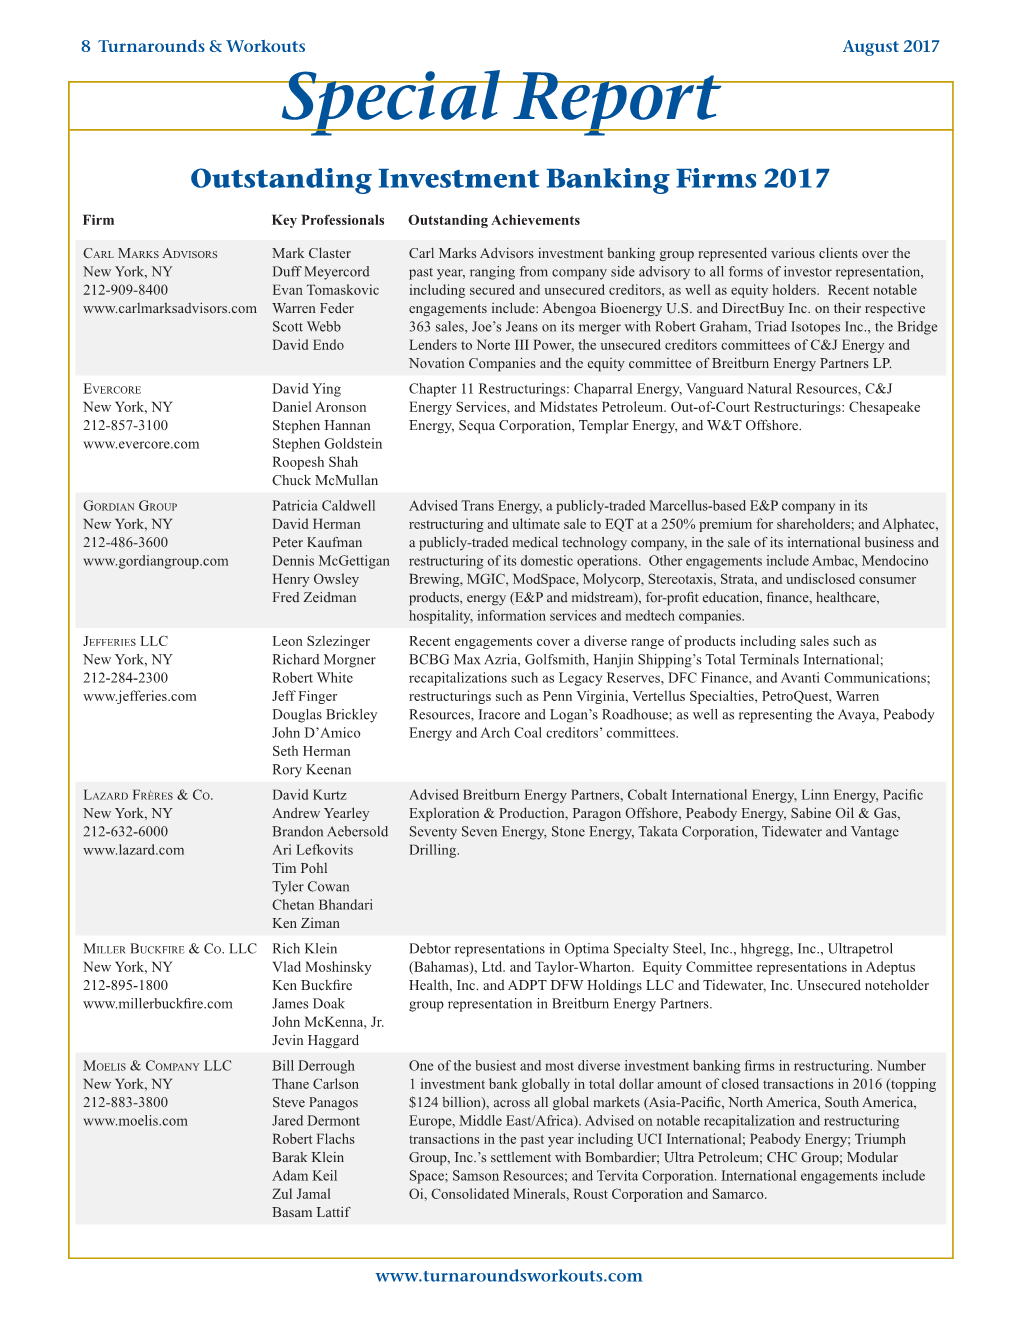 Outstanding Investment Banking Firms 2017